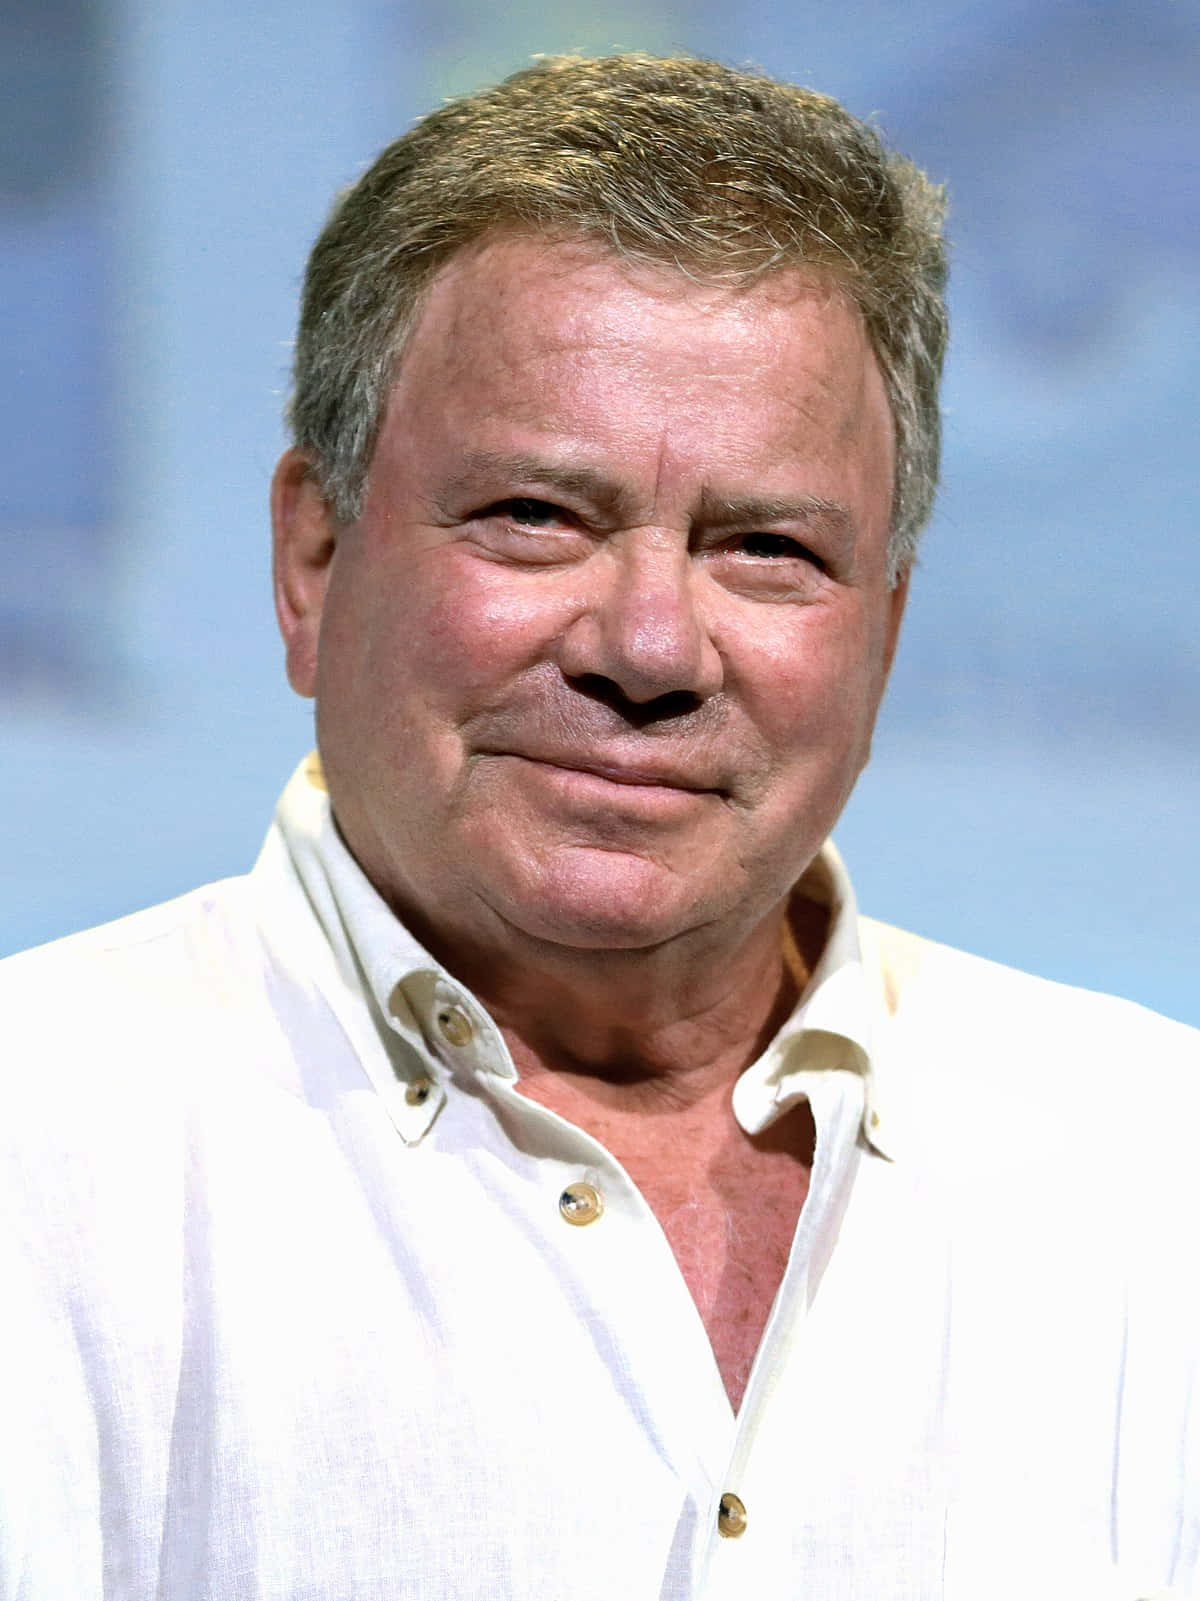 Legendary Actor William Shatner In A Contemplative Pose Background